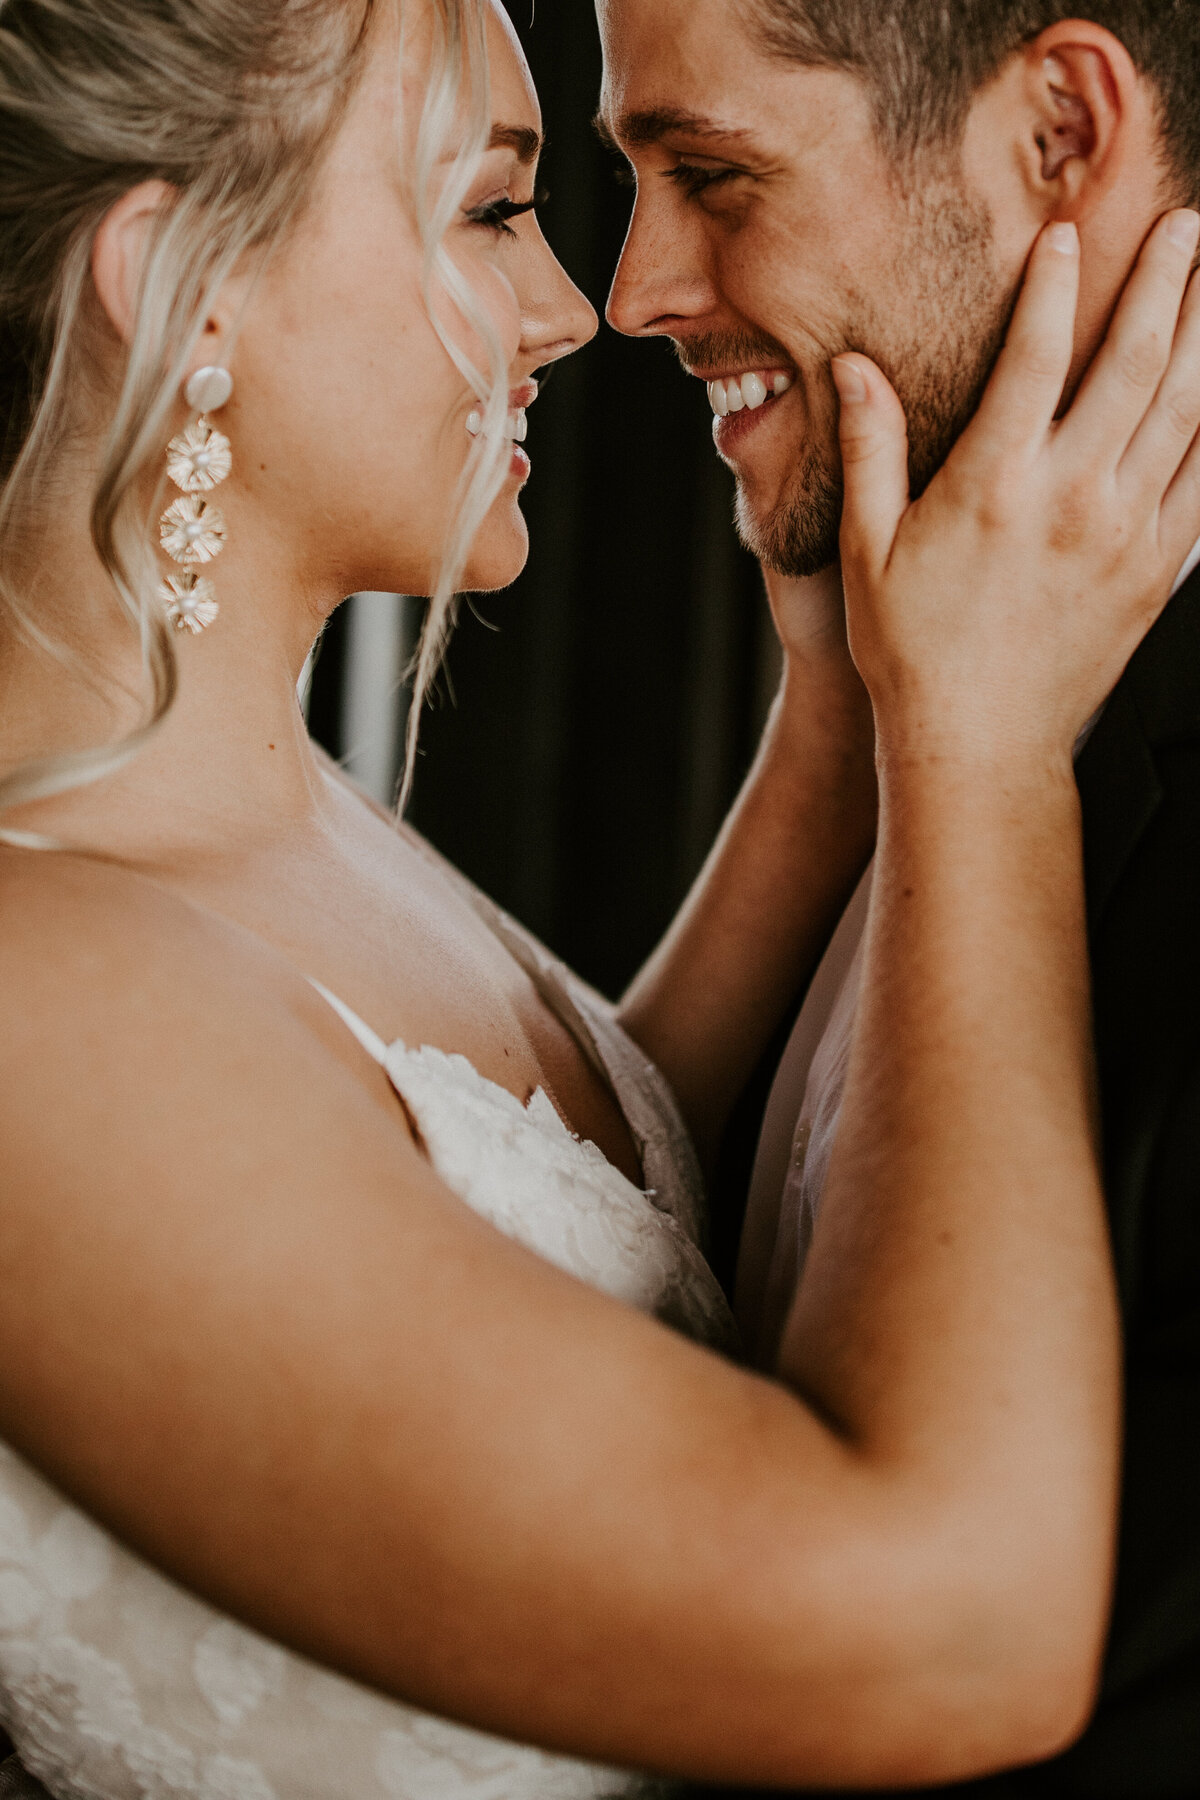 A smiling bride wearing a white wedding gown and earrings holds a smiling groom by the jawline while locking eyes.